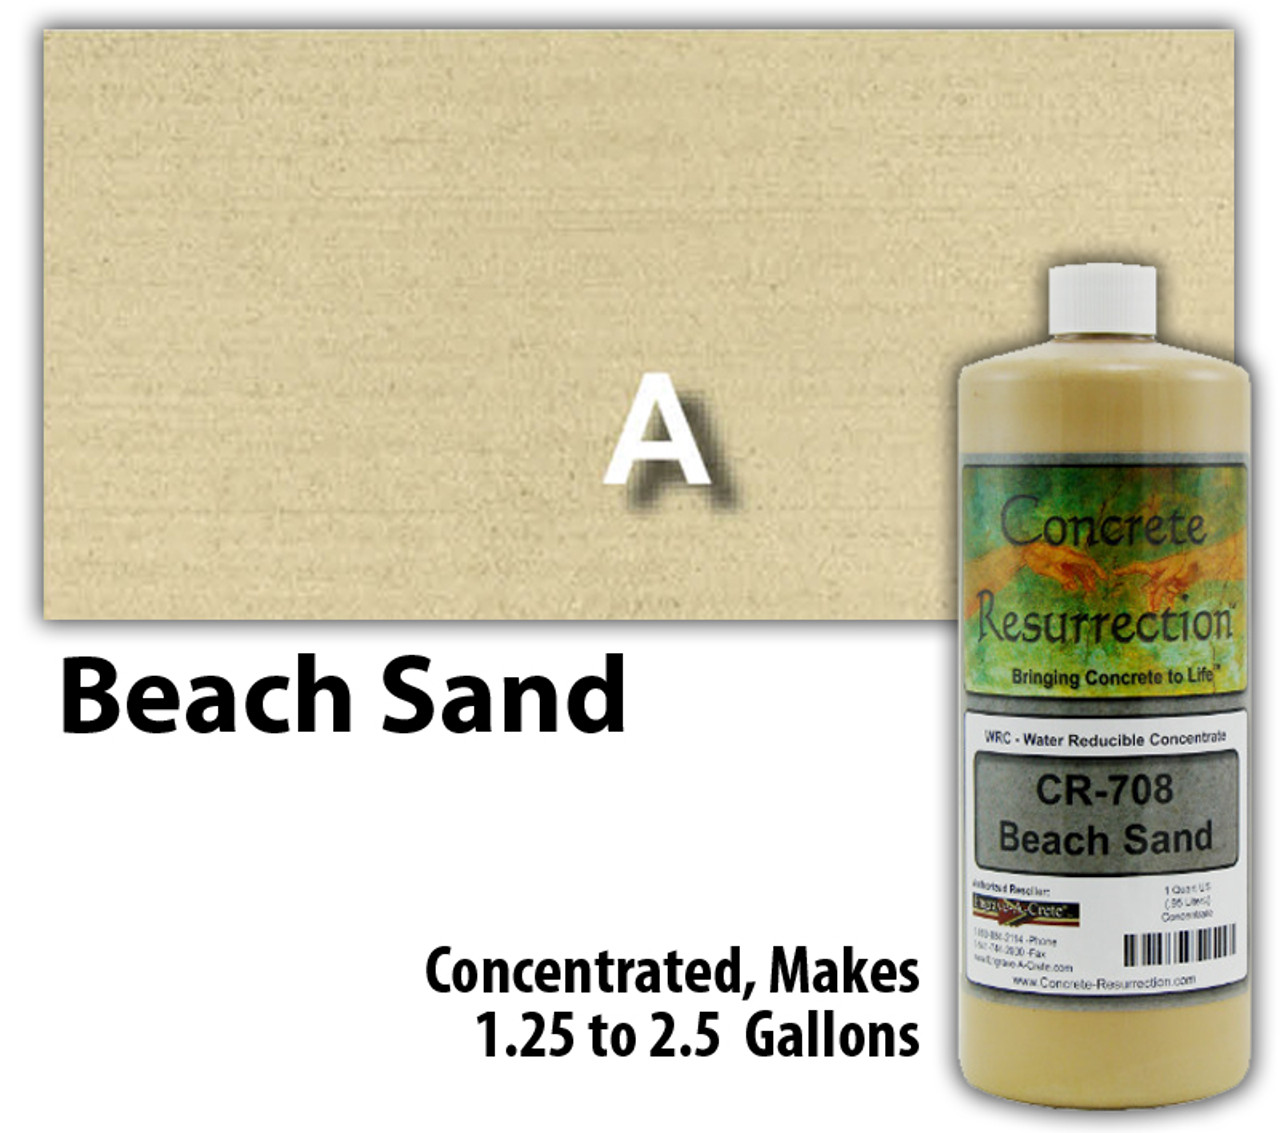 Water Reducible Concentrated (WRC) Concrete Stain - Beach Sand 32oz